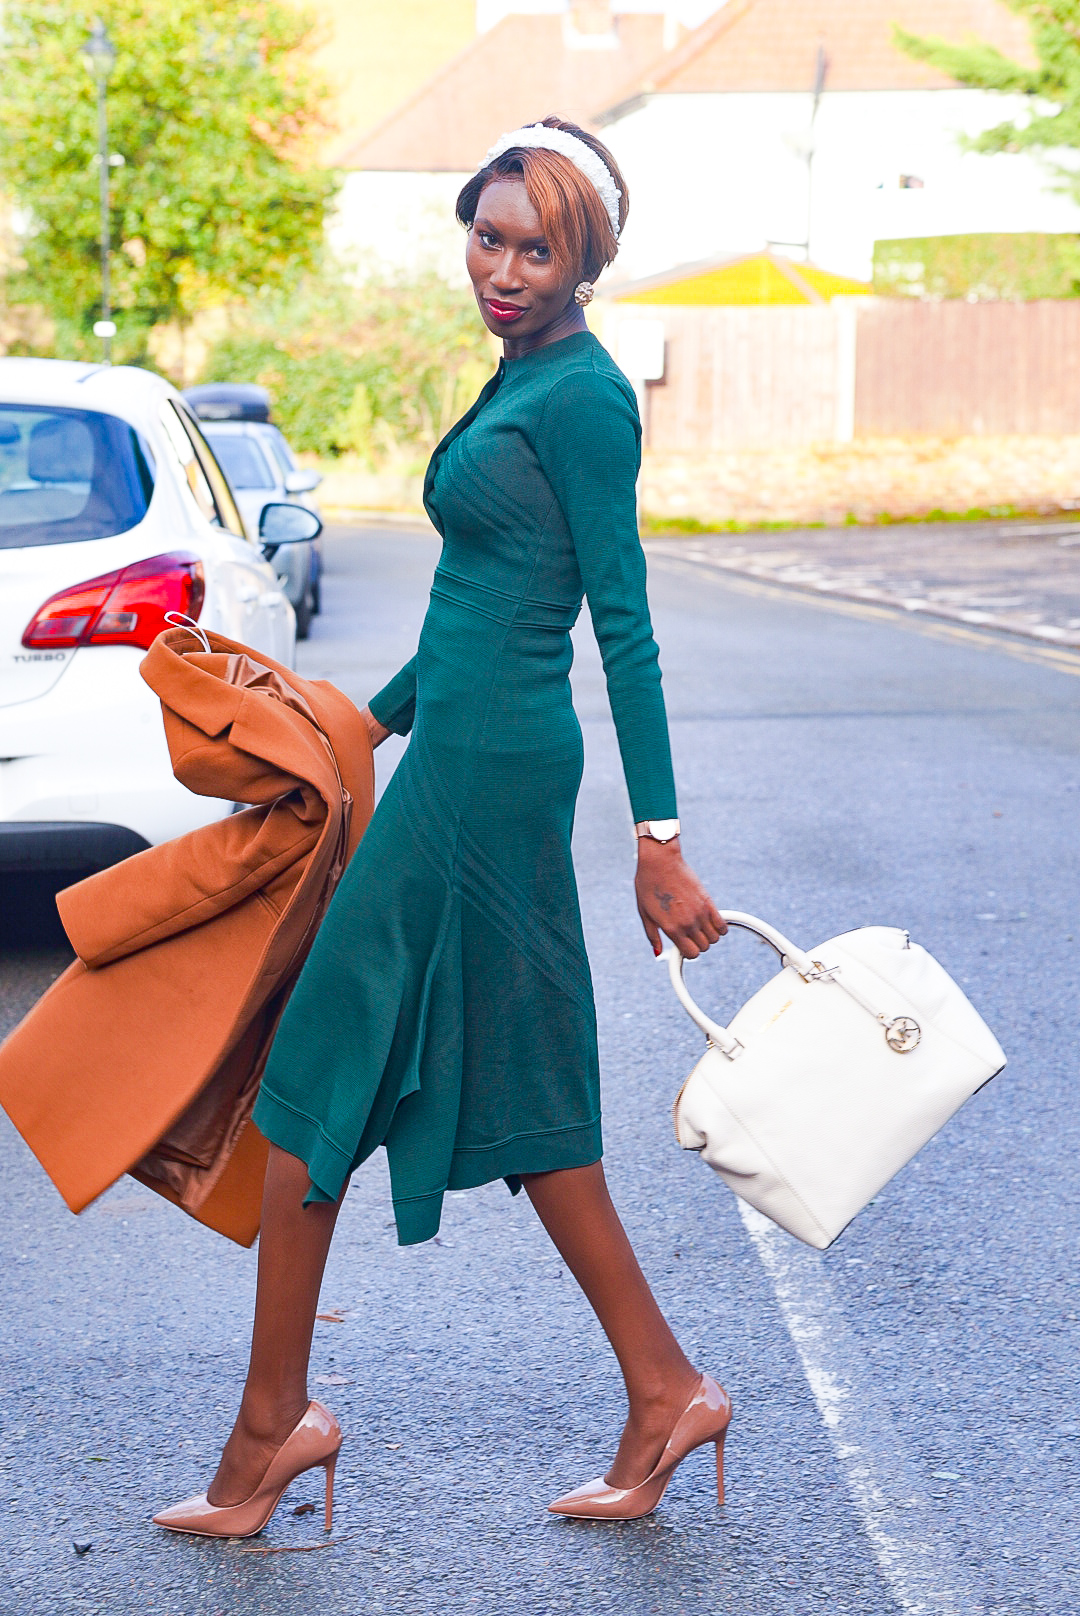 Green + Tan - Have More Faith!
THATCORPORATECHIC
WORKWEAR
CHURCH STYLE
HOW TO WEAR  GREEN AND TAN